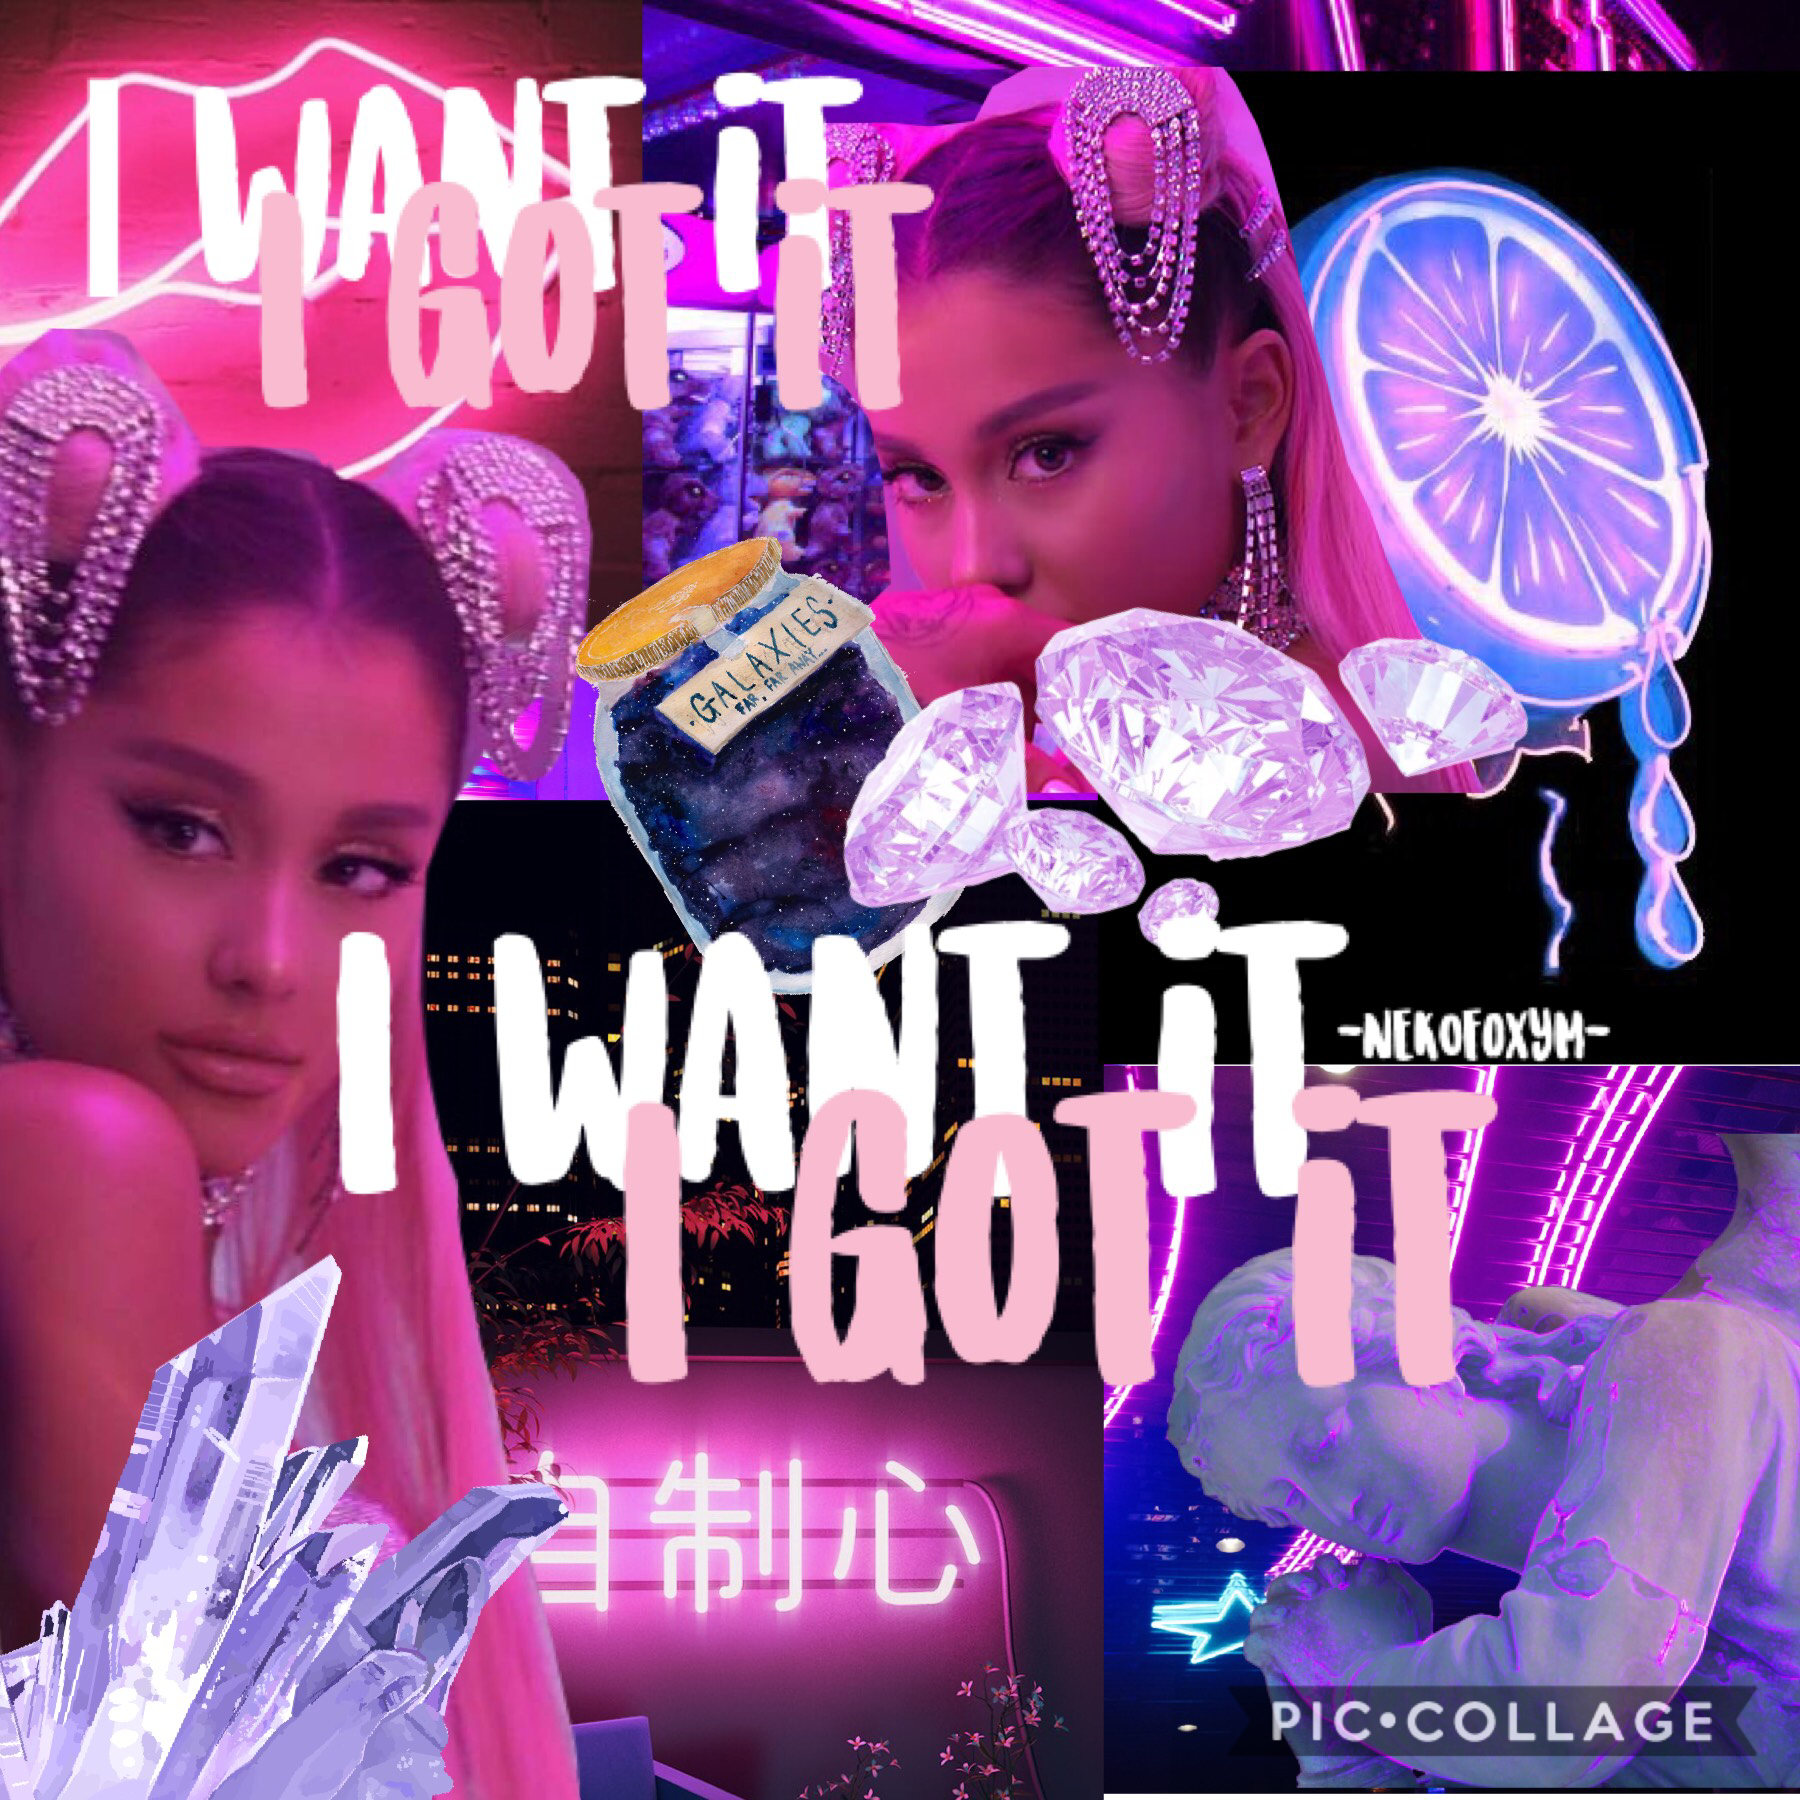 An edit of Ariana Grandes song 7 Rings!! I absolutely love this songggg!!!!!! 